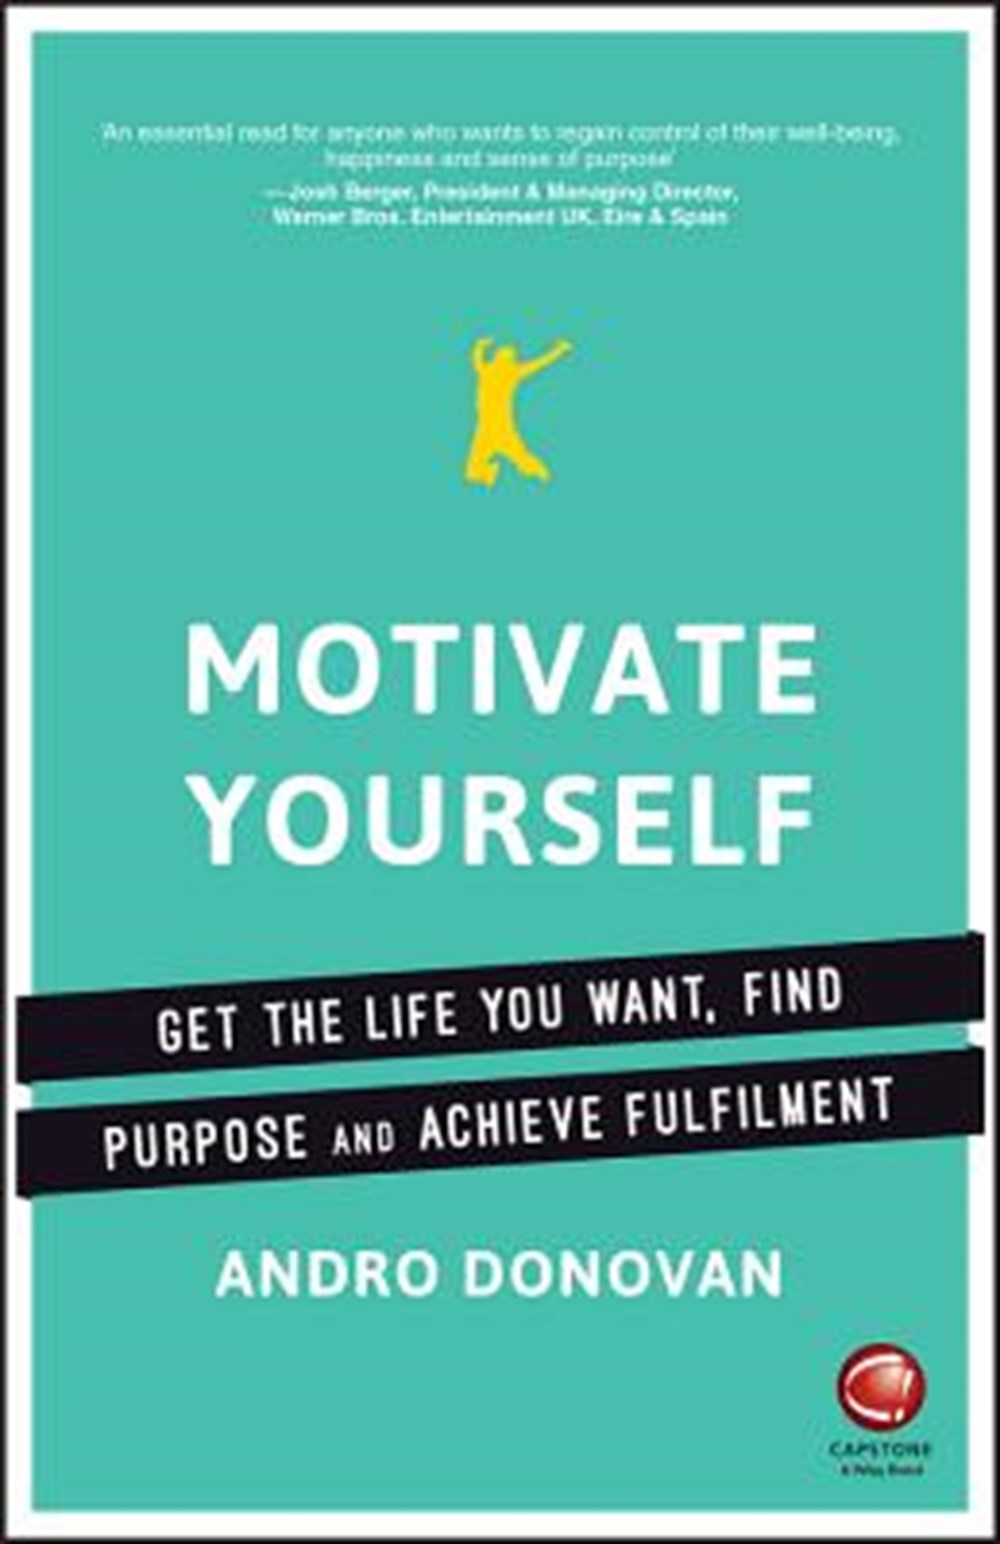 Motivate Yourself Get the Life You Want, Find Purpose and Achieve Fulfilment